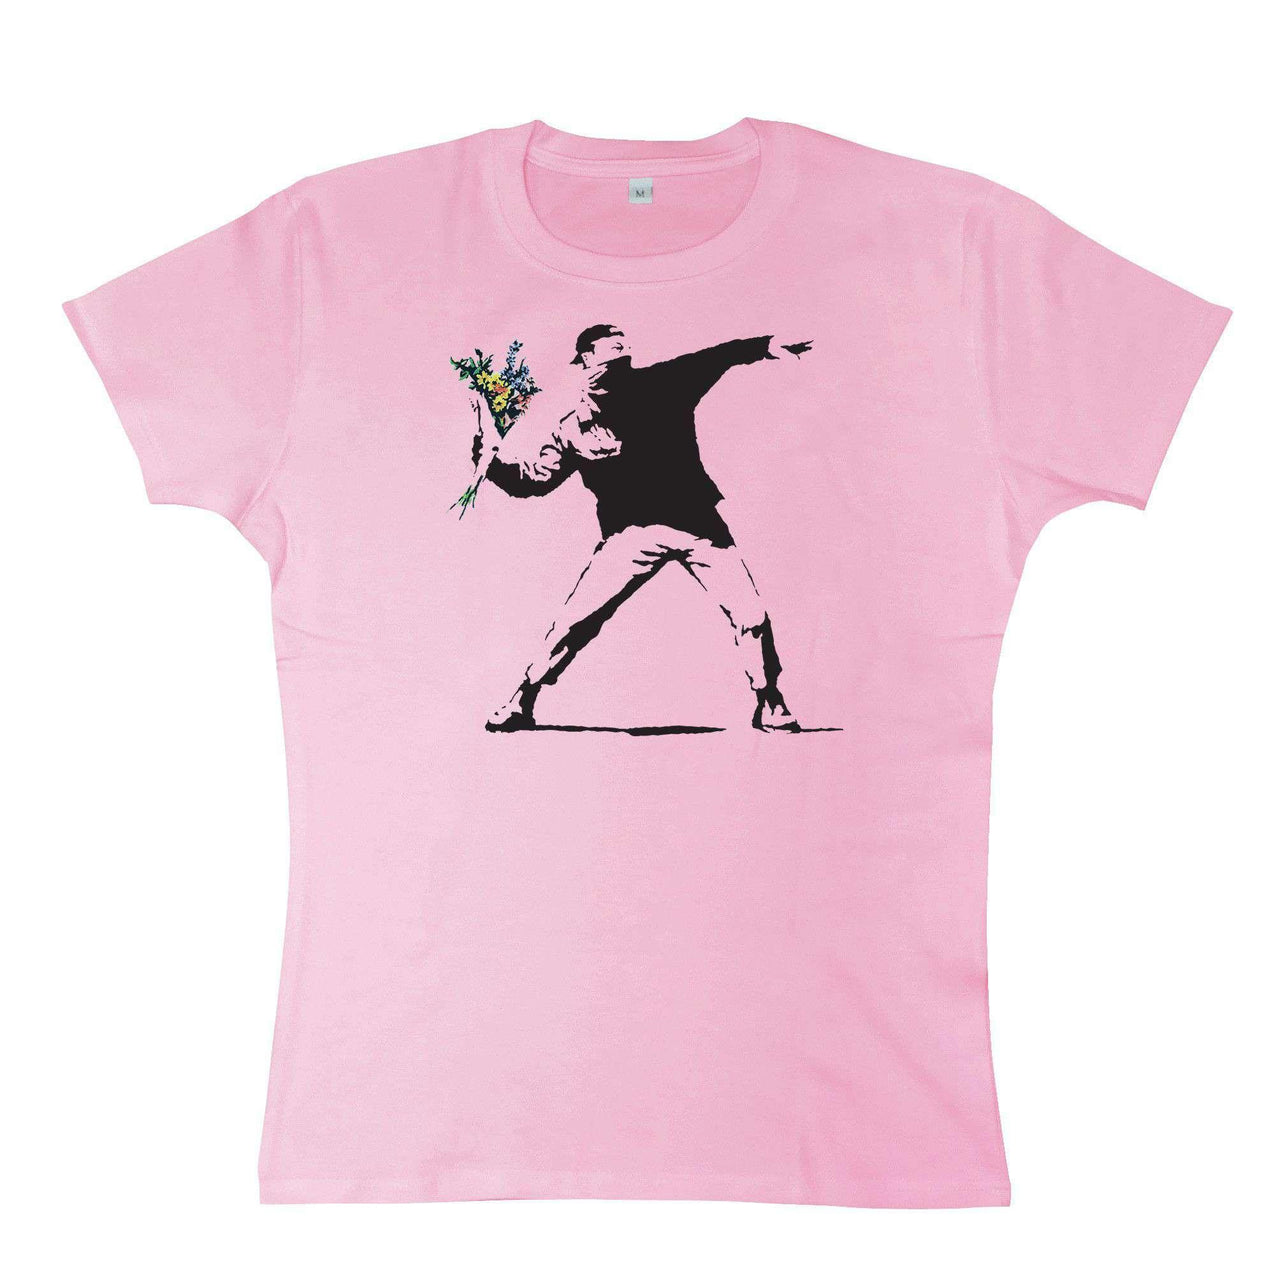 Banksy Womens T-Shirt - Throwing Flowers - 8Ball Fitted Womens T-Shirt